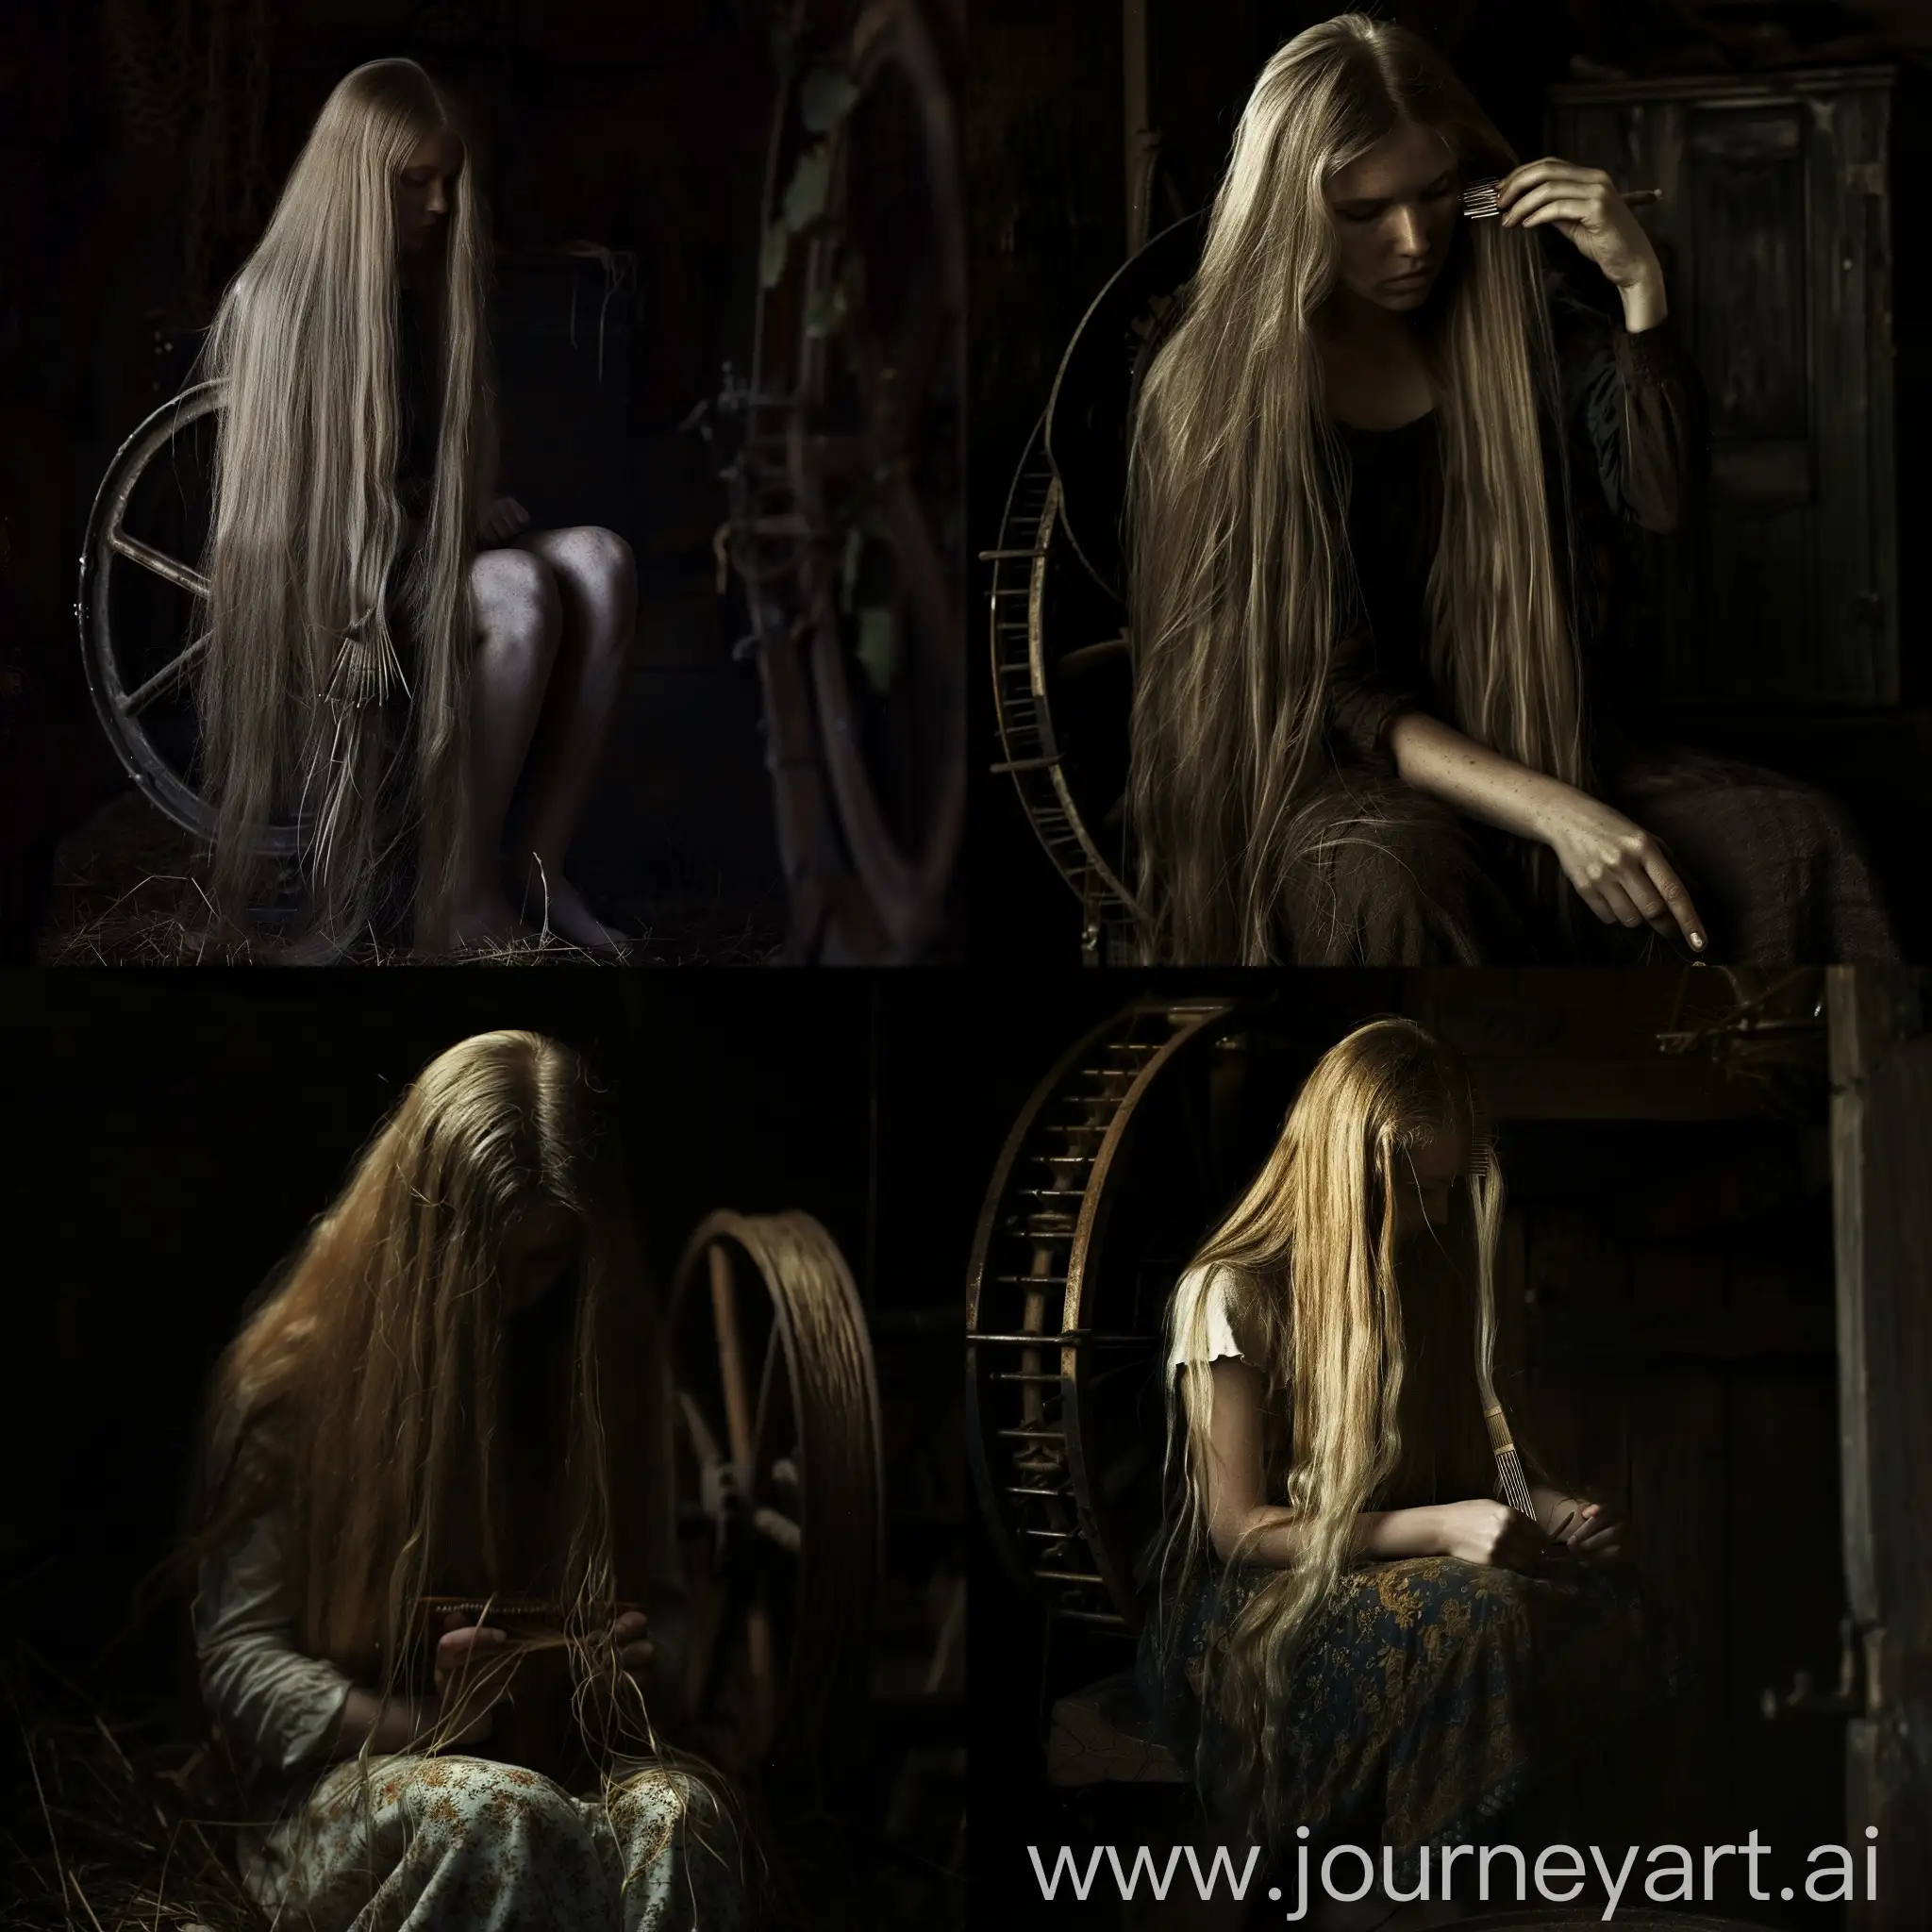 Solitary-Blonde-Girl-Combing-Hair-on-Antique-Spinning-Wheel-in-Darkness